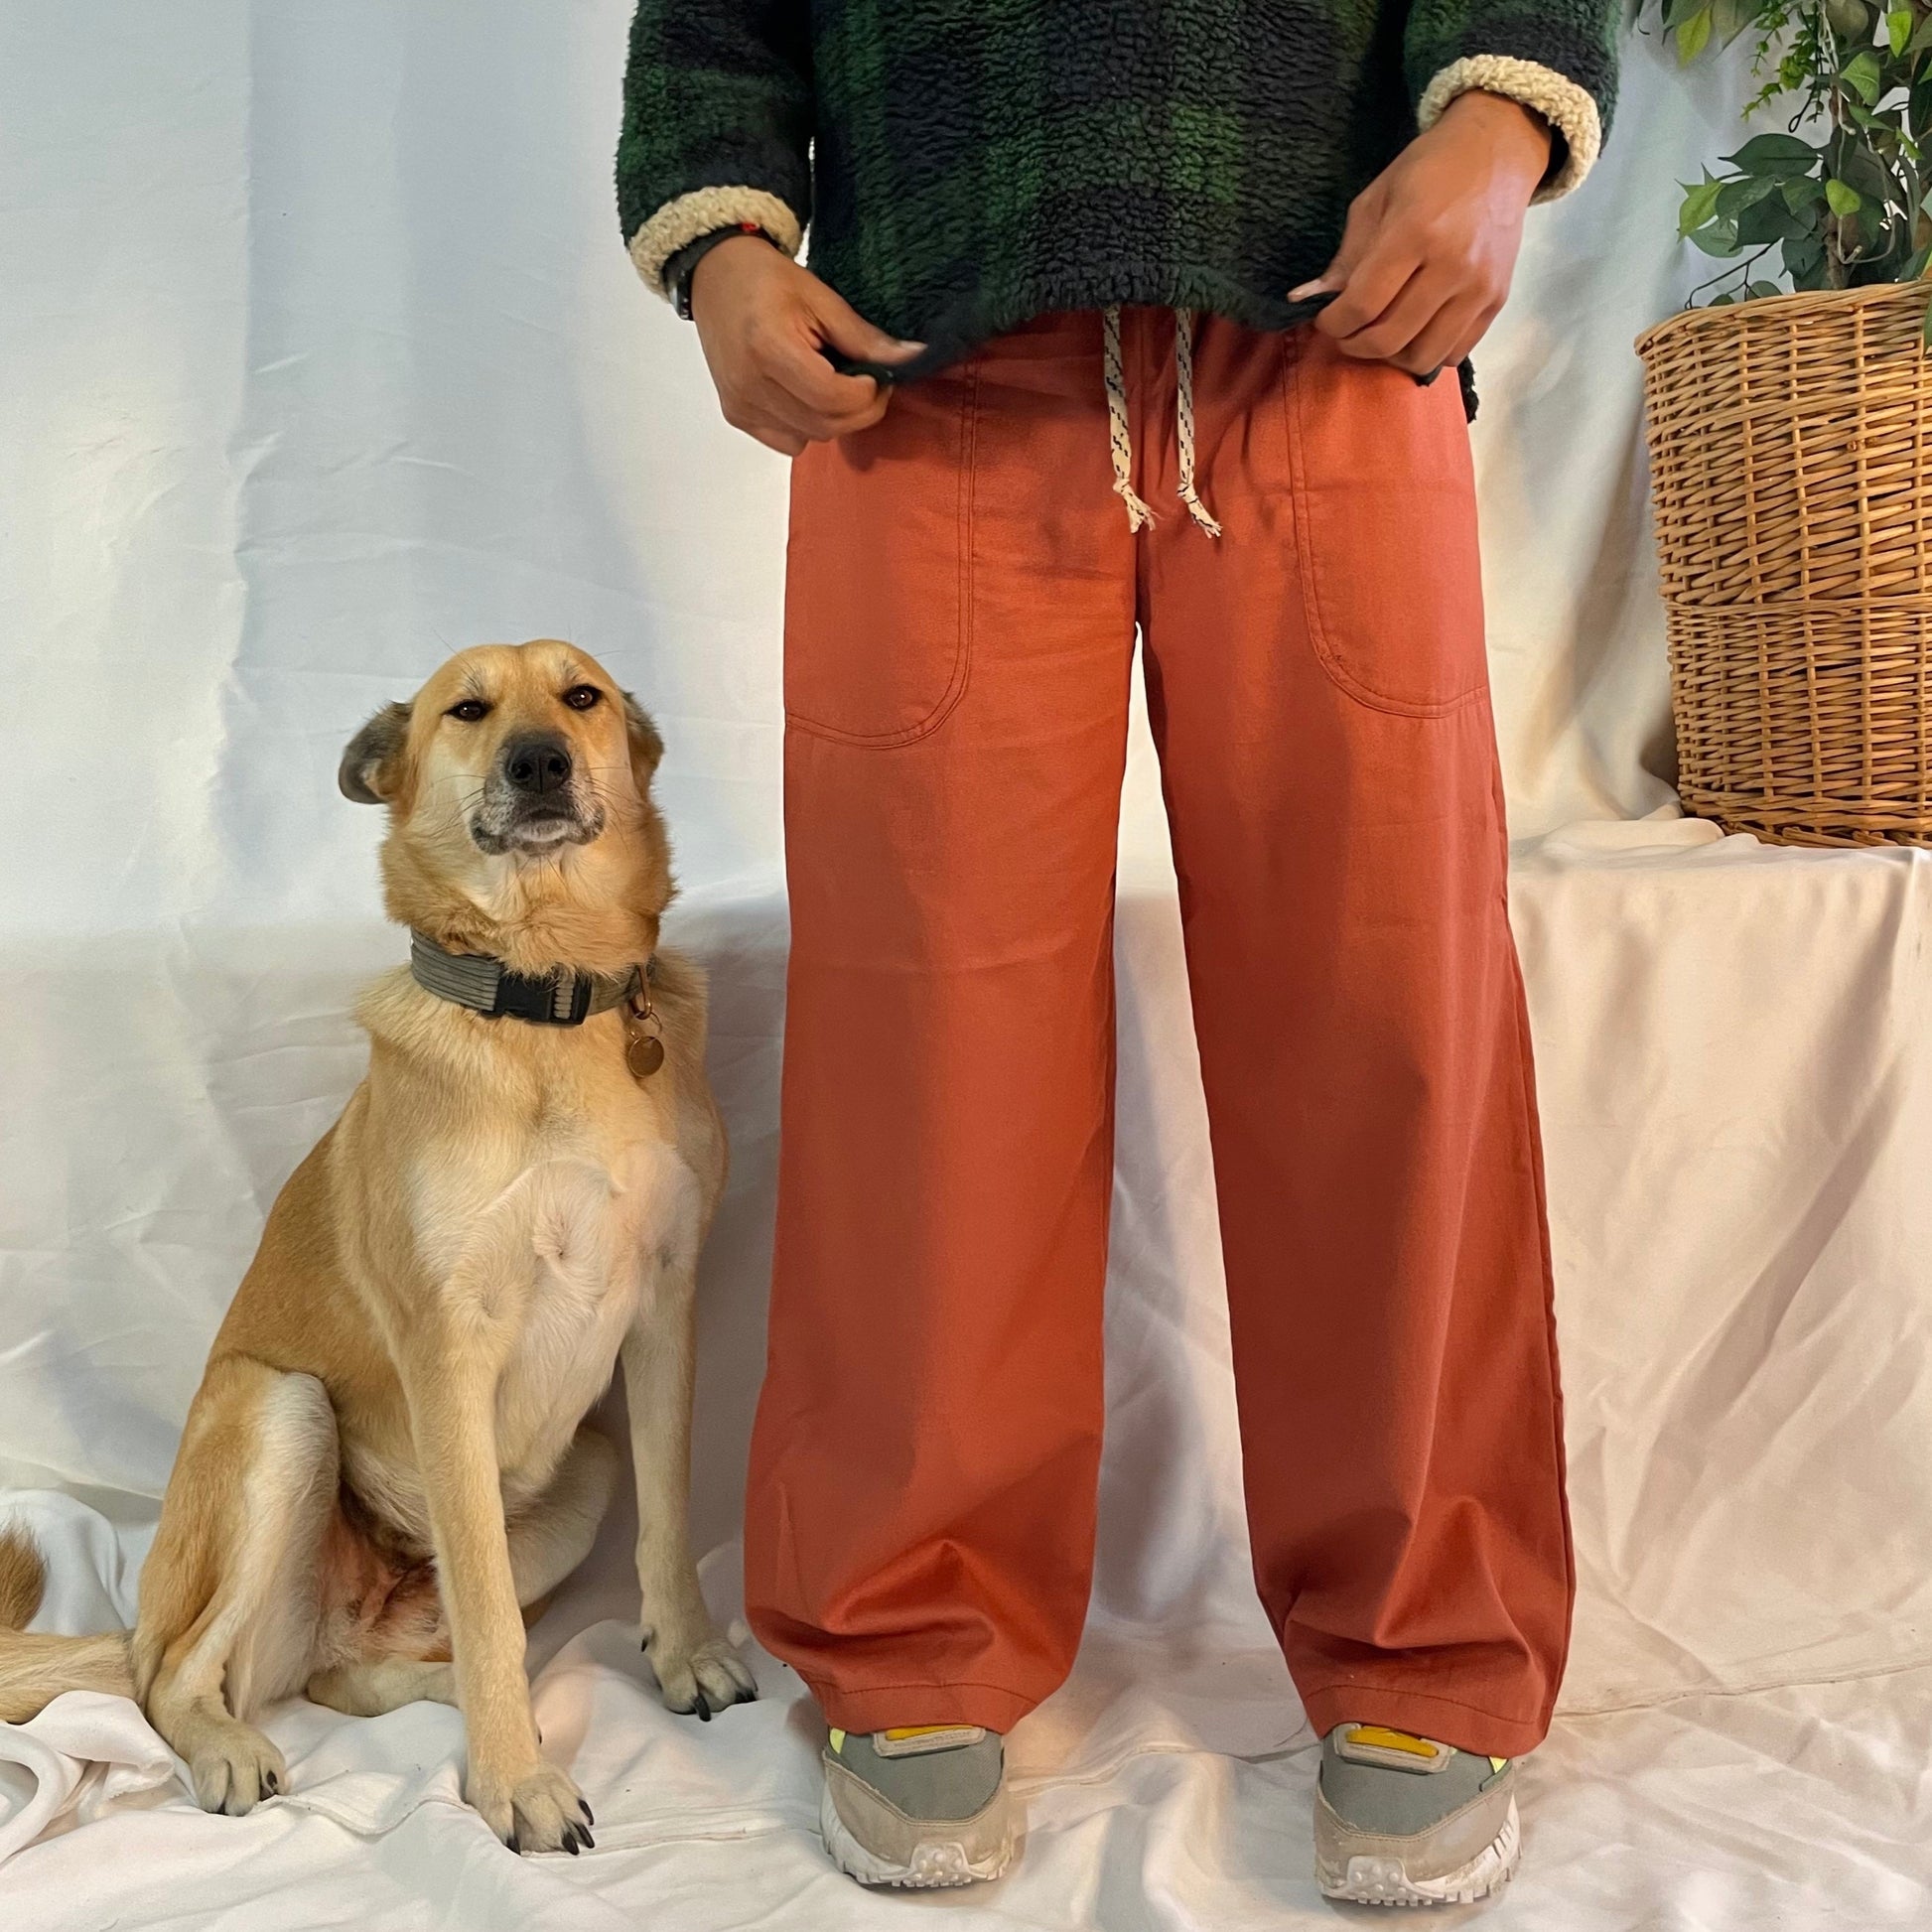 Dog sits next to a model wearing rust coloured pants with a wool plaid jersey against a white backdrop.